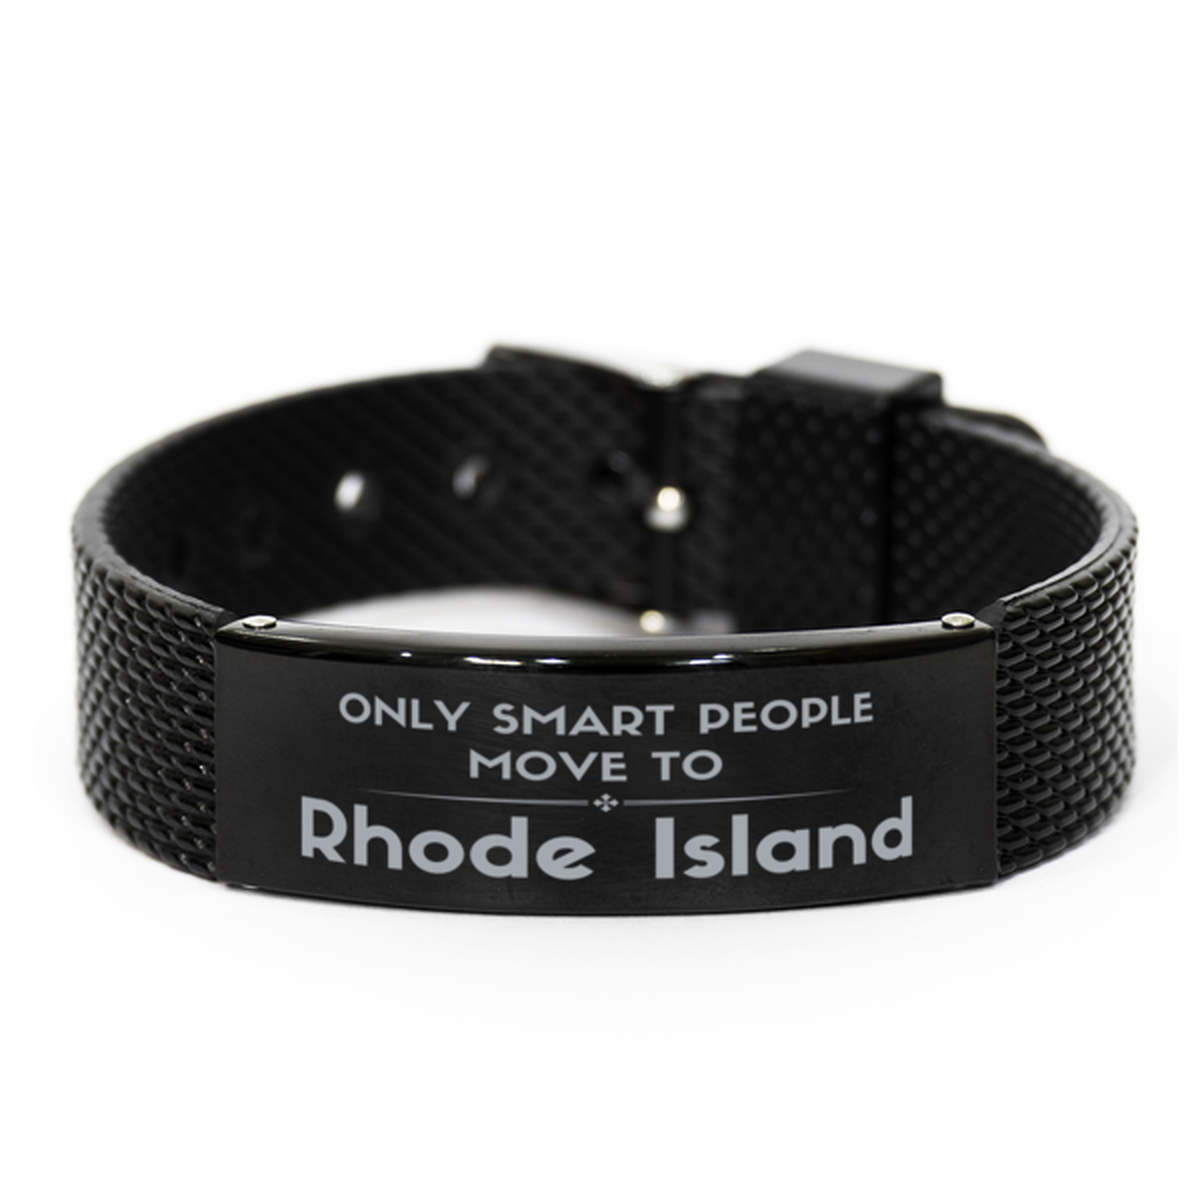 Only smart people move to Rhode Island Black Shark Mesh Bracelet, Gag Gifts For Rhode Island, Move to Rhode Island Gifts for Friends Coworker Funny Saying Quote